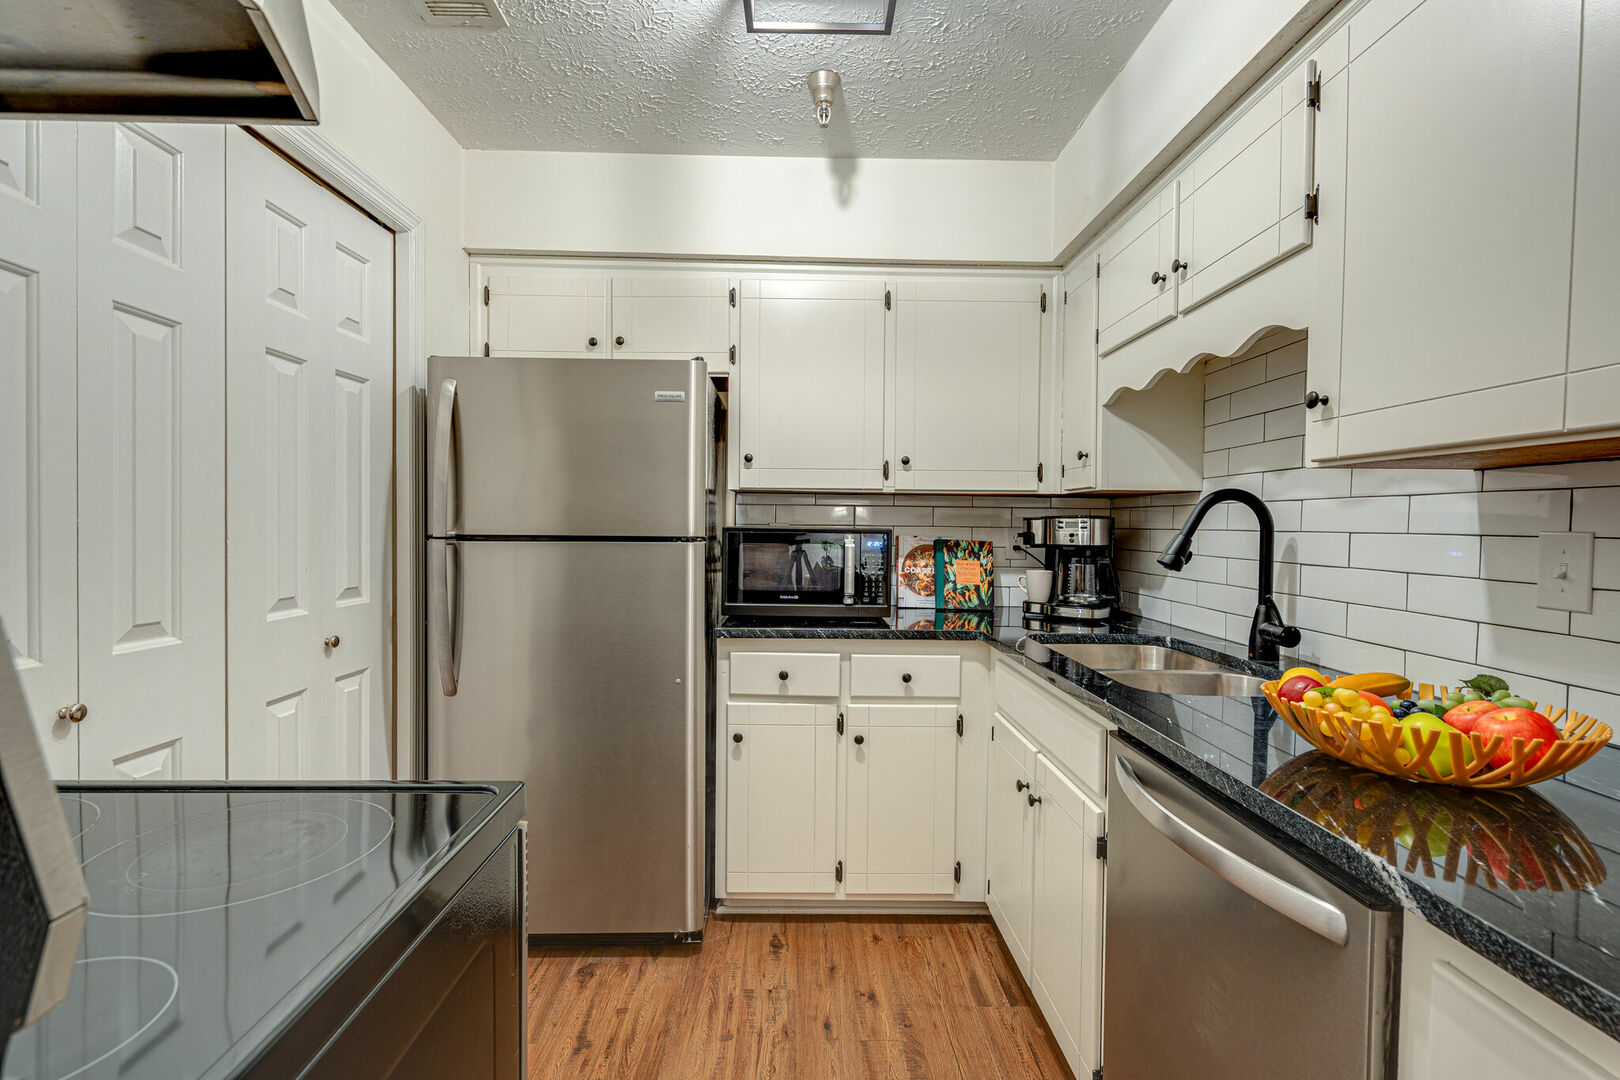 Full kitchen stocked with basic cooking essentials and stainless steel appliances.